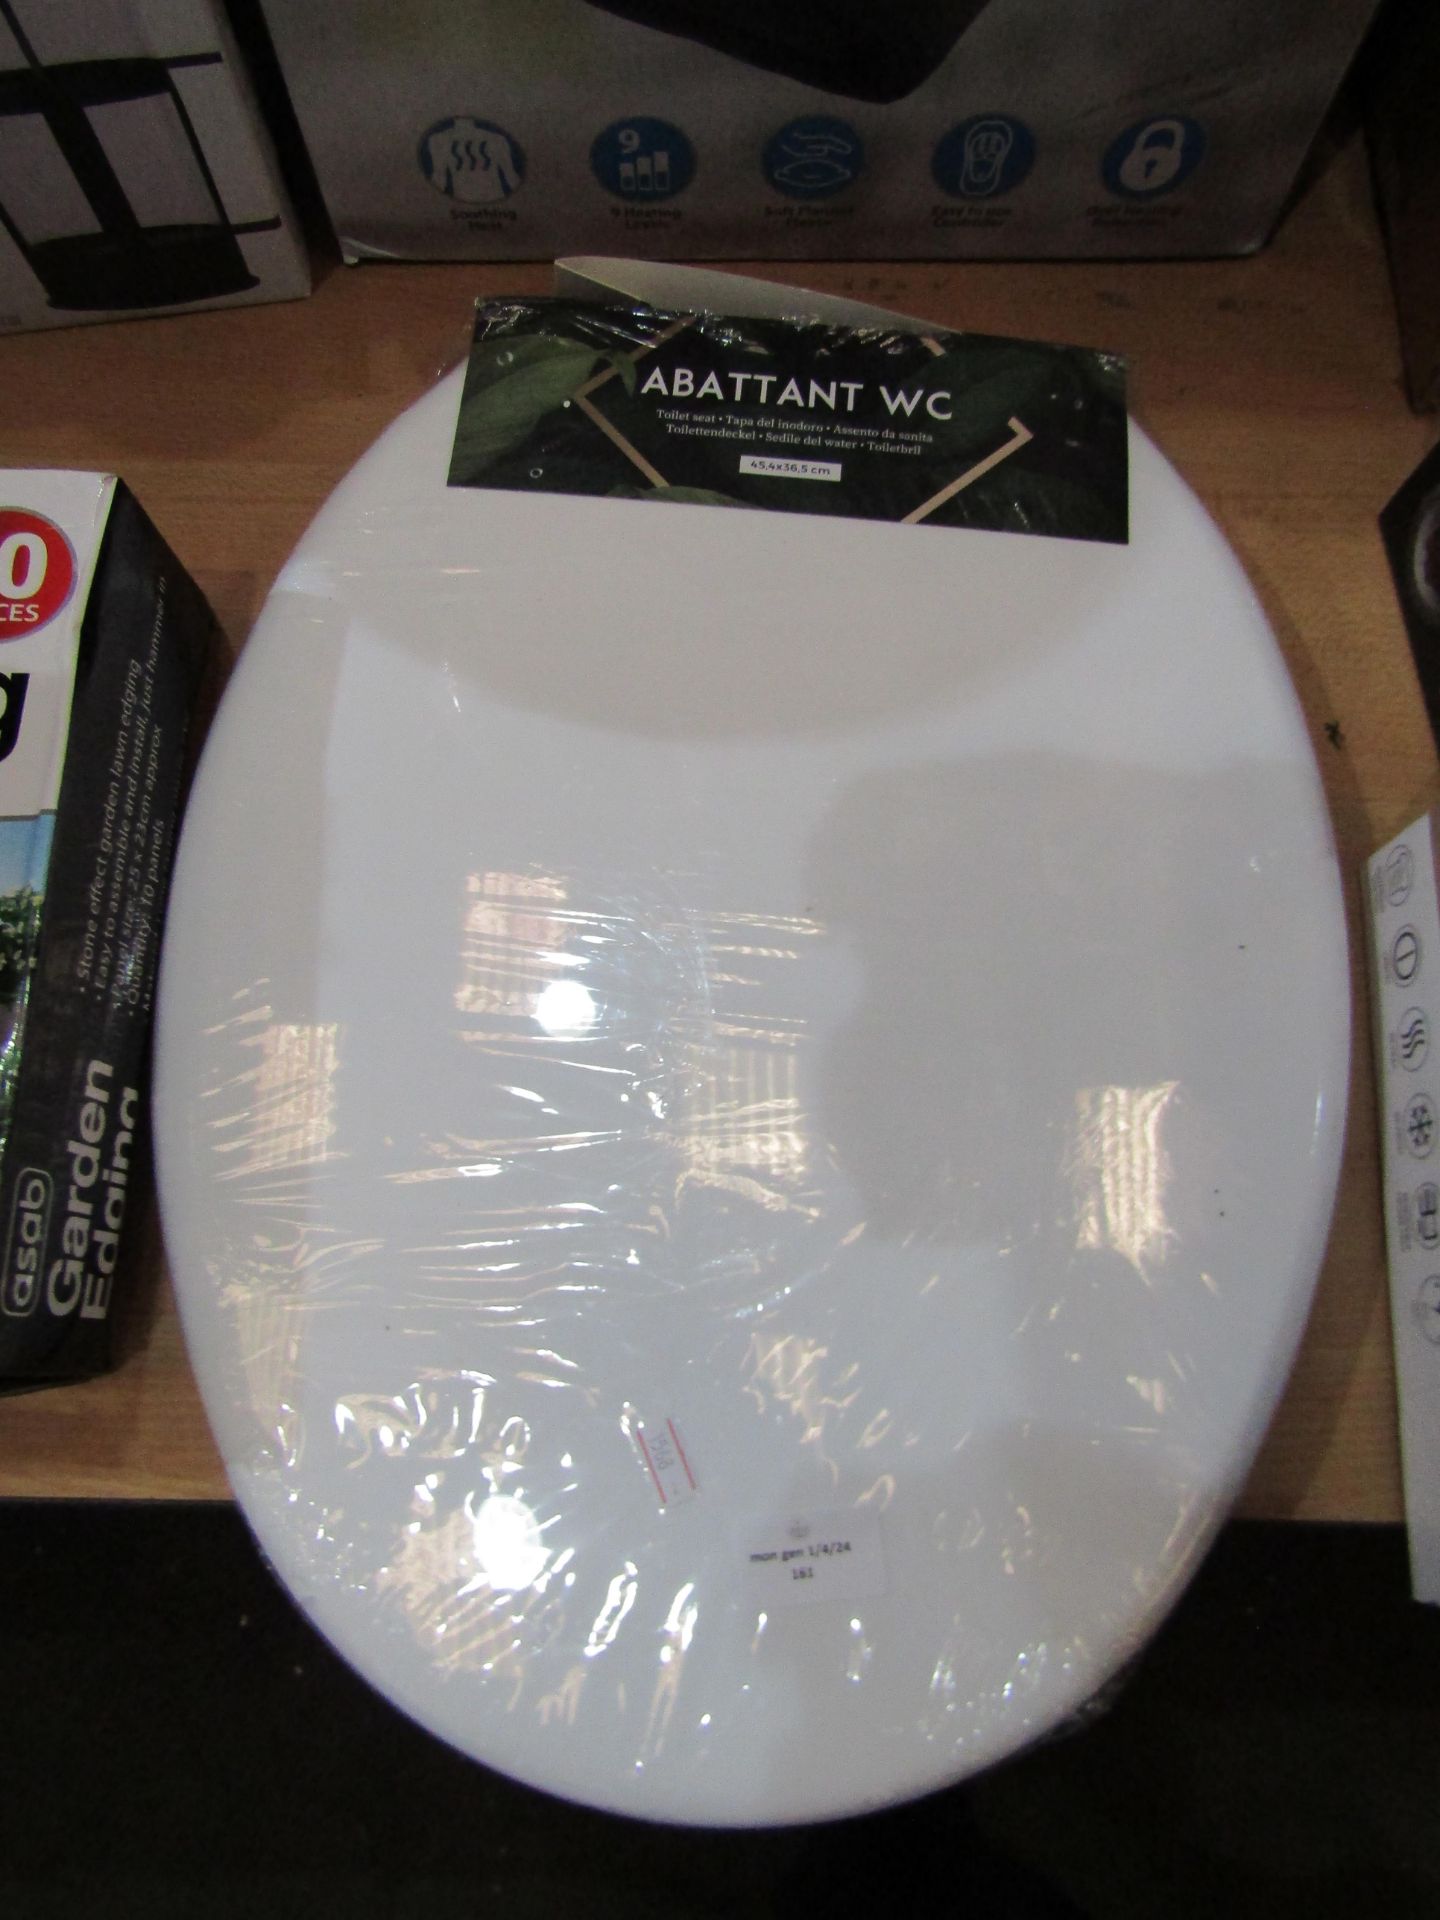 Abattant WC Toilet Seat, Size: 45,4x36,5cm - Unused & Packaged.